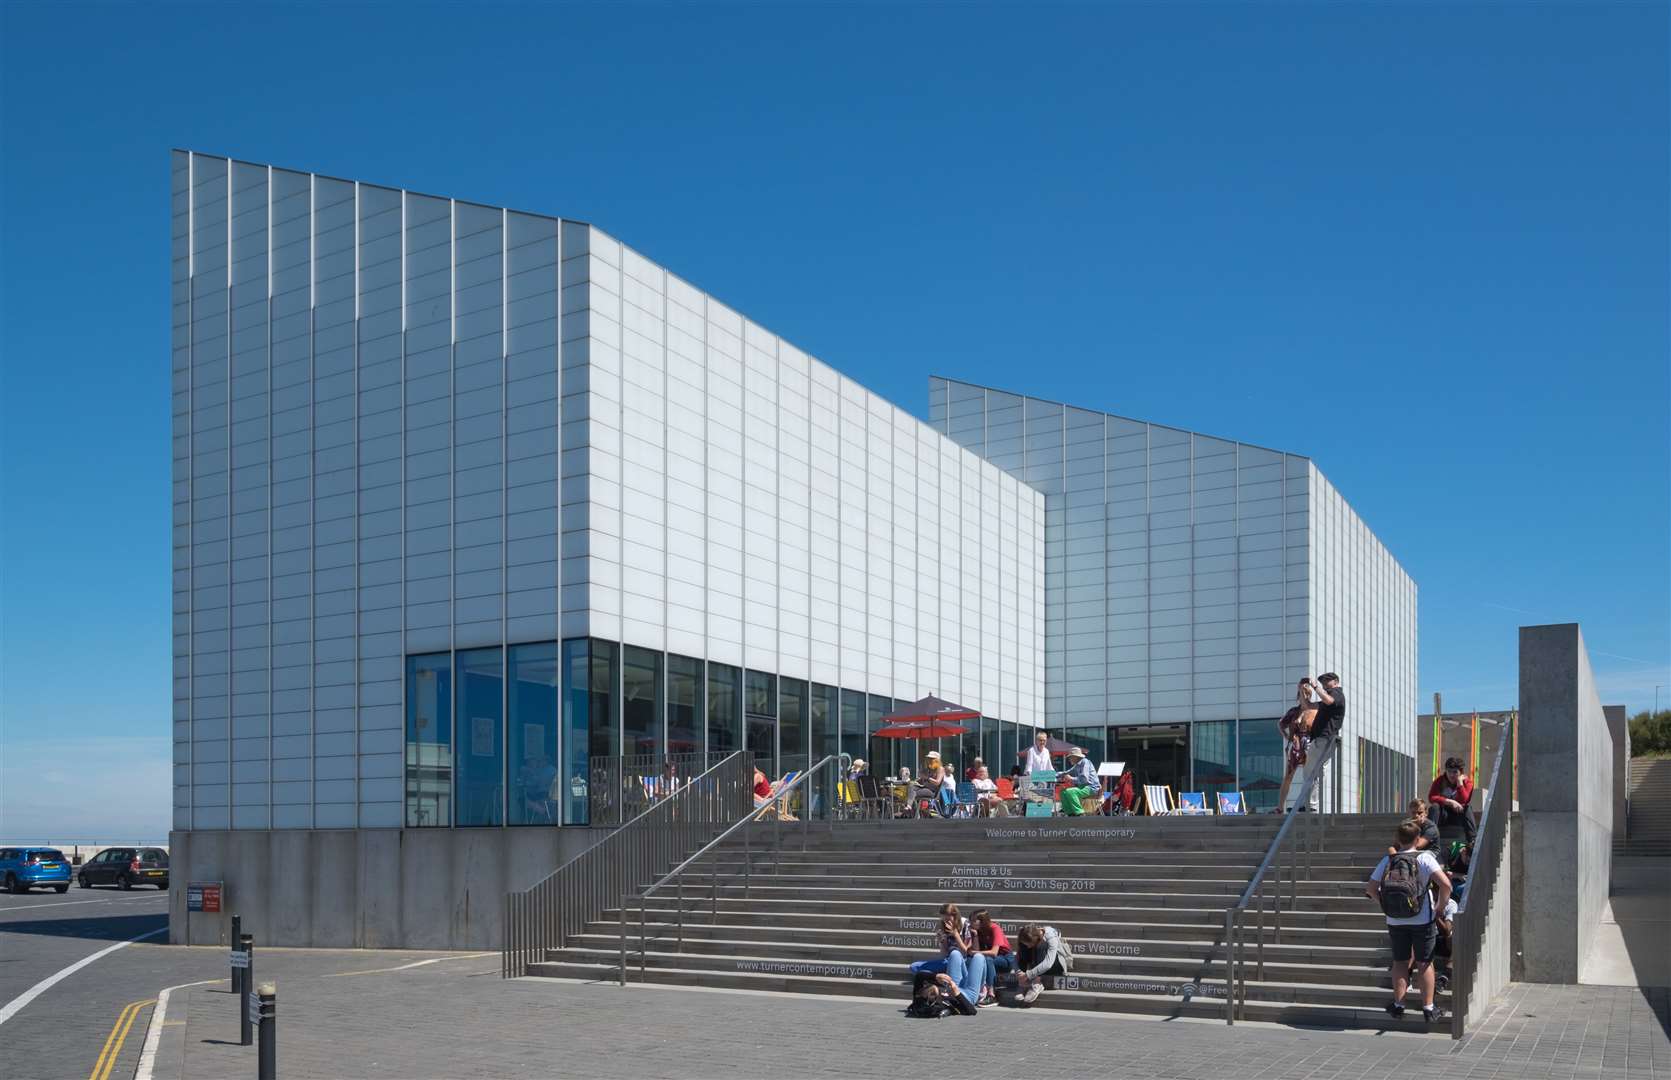 Turner Contemporary in Margate will host both the nominations and awards ceremony for this year's Turner Prize